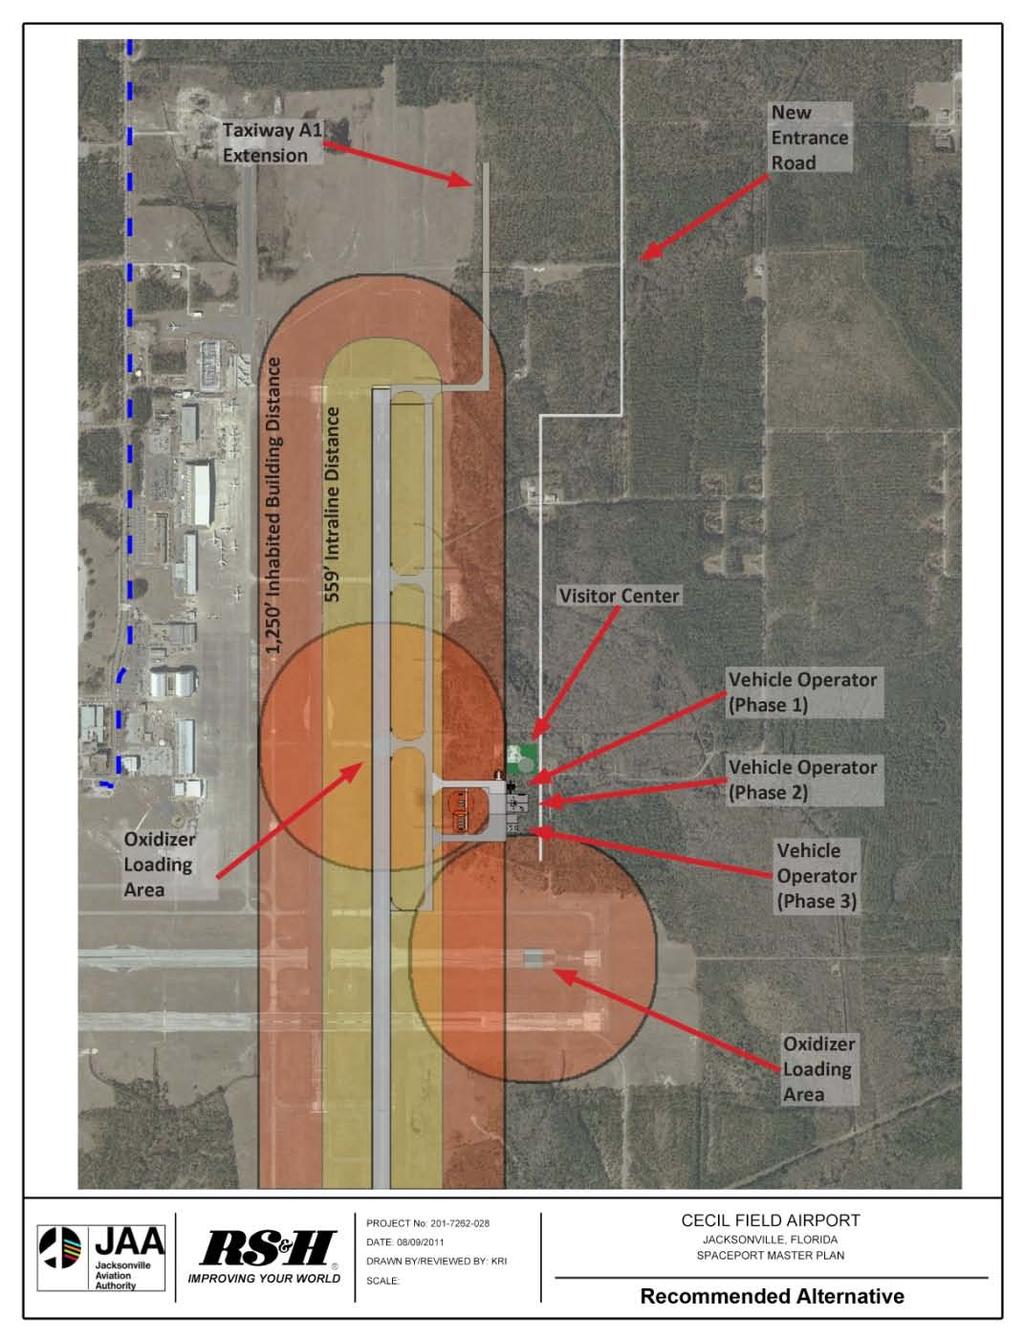 For the long term, the recommended alternative is to develop the operator facilities and visitor center east of Runway 18L-36R and north of Taxiway B.